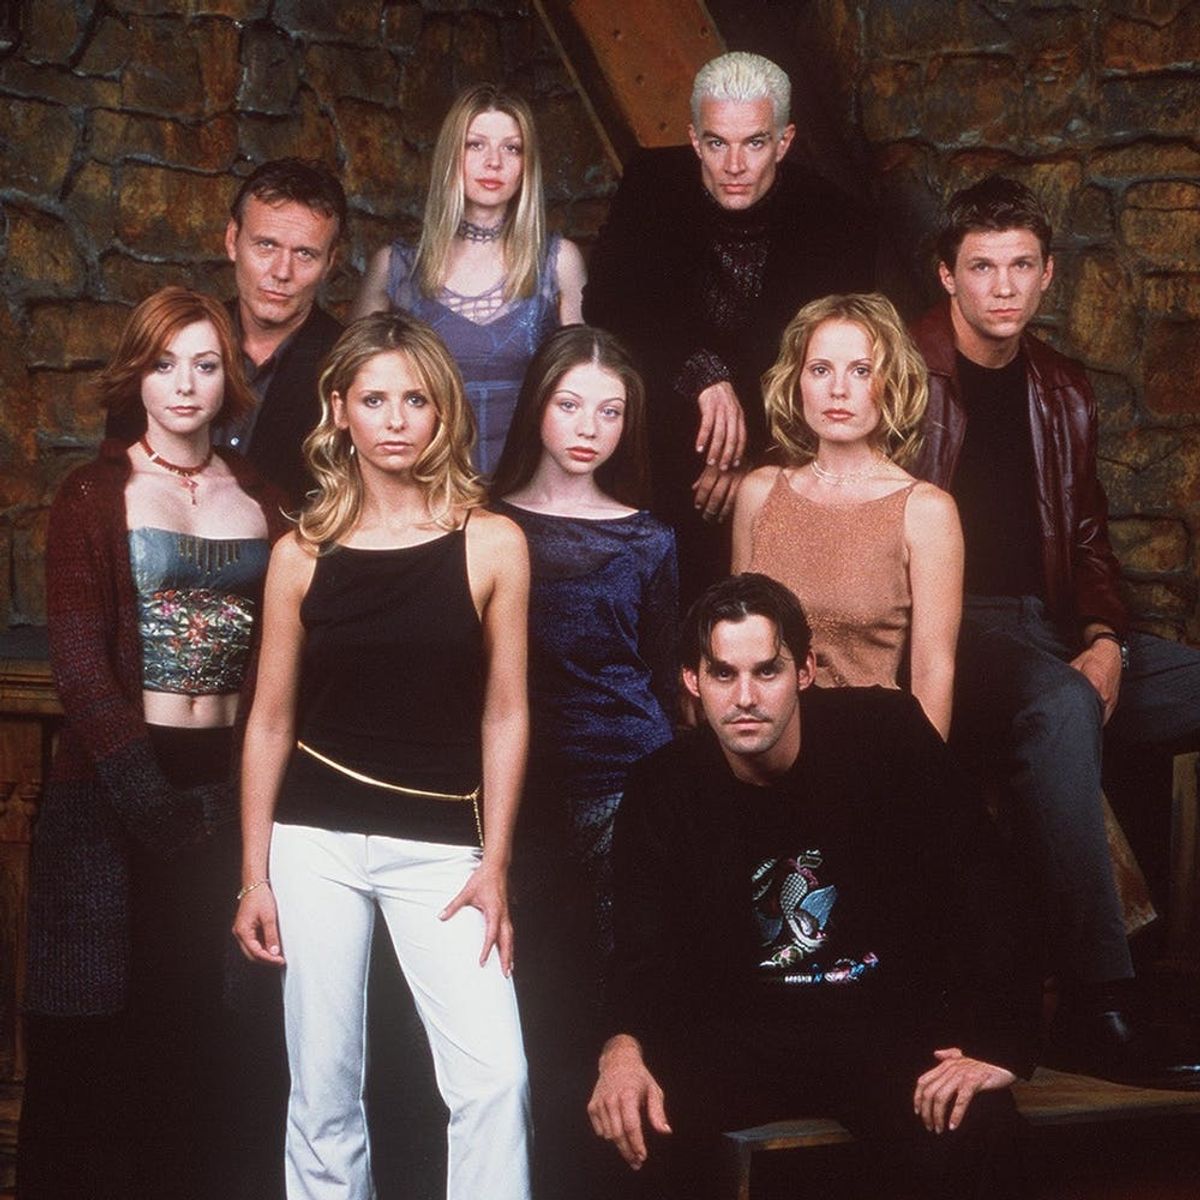 Find Out Where All the Stars of Buffy the Vampire Slayer Are Now